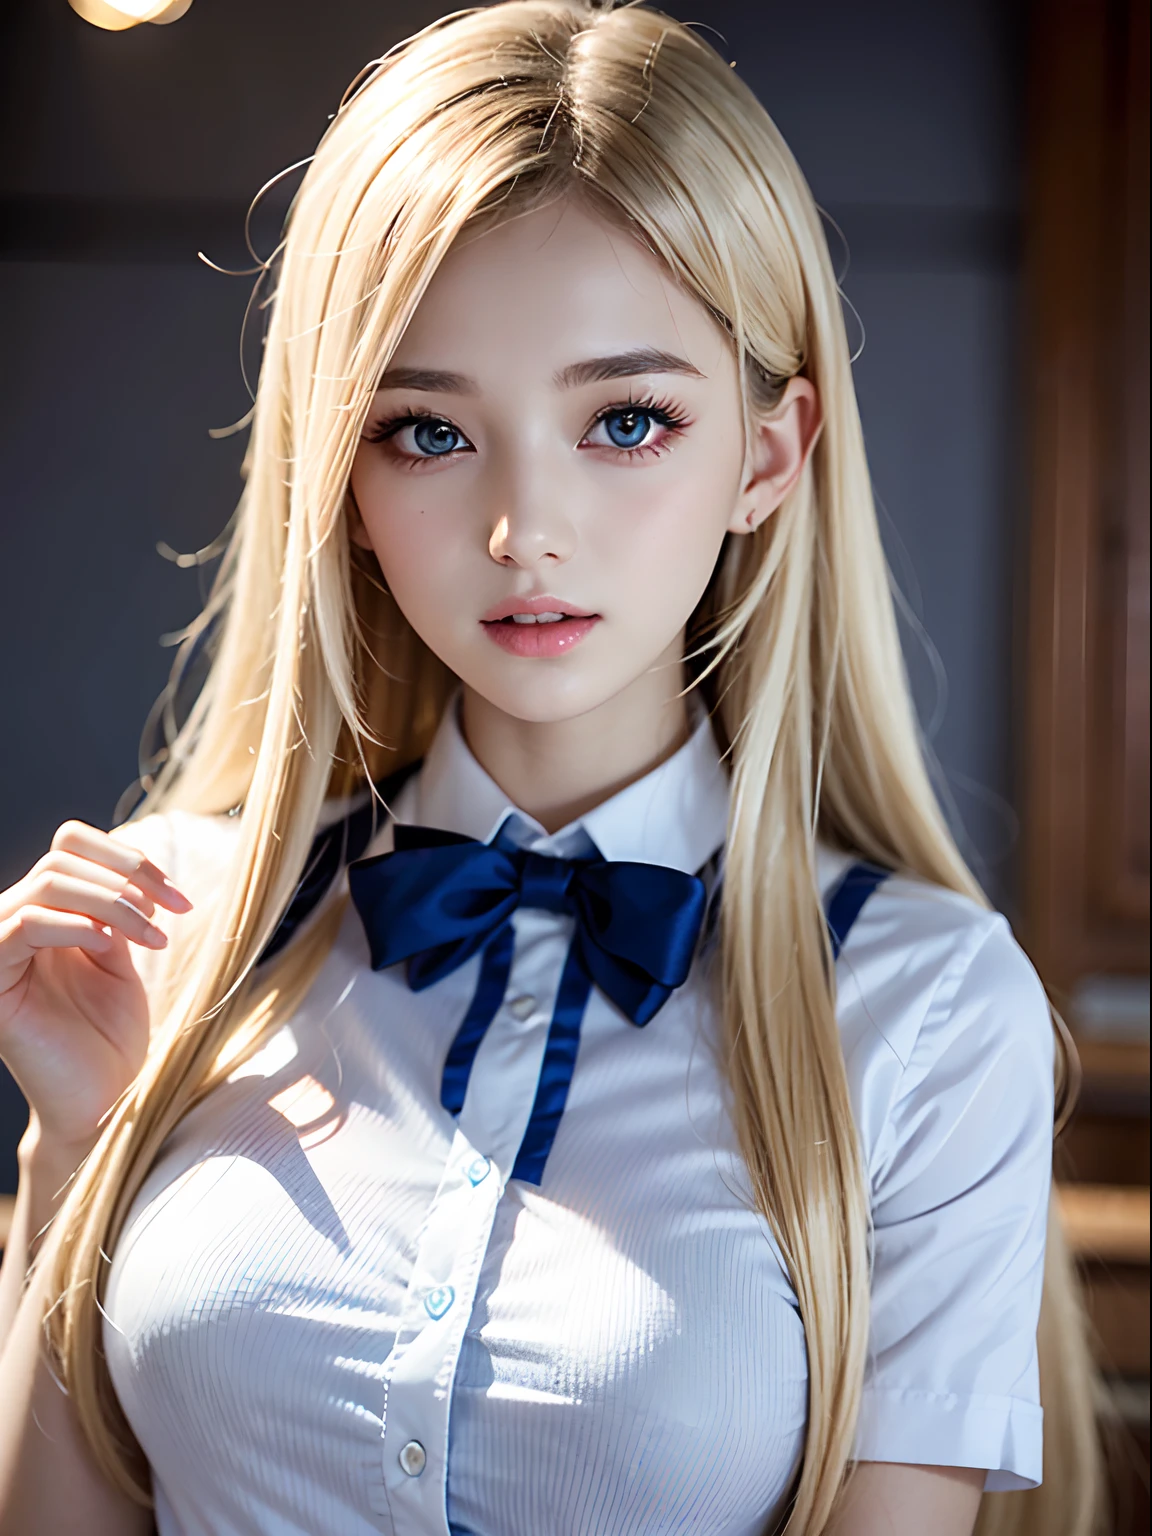 portlate、School Uniforms、bright expression、Young shiny shiny white shiny skin、Best Looks、ultimate beauty girl、Platinum blonde hair with dazzling highlights、shiny light hair,、Super long silky straight hair、Beautiful bangs that shine、Glowing crystal clear attractive blue eyes、Very beautiful nice cute 16 year old girl、Lush bust